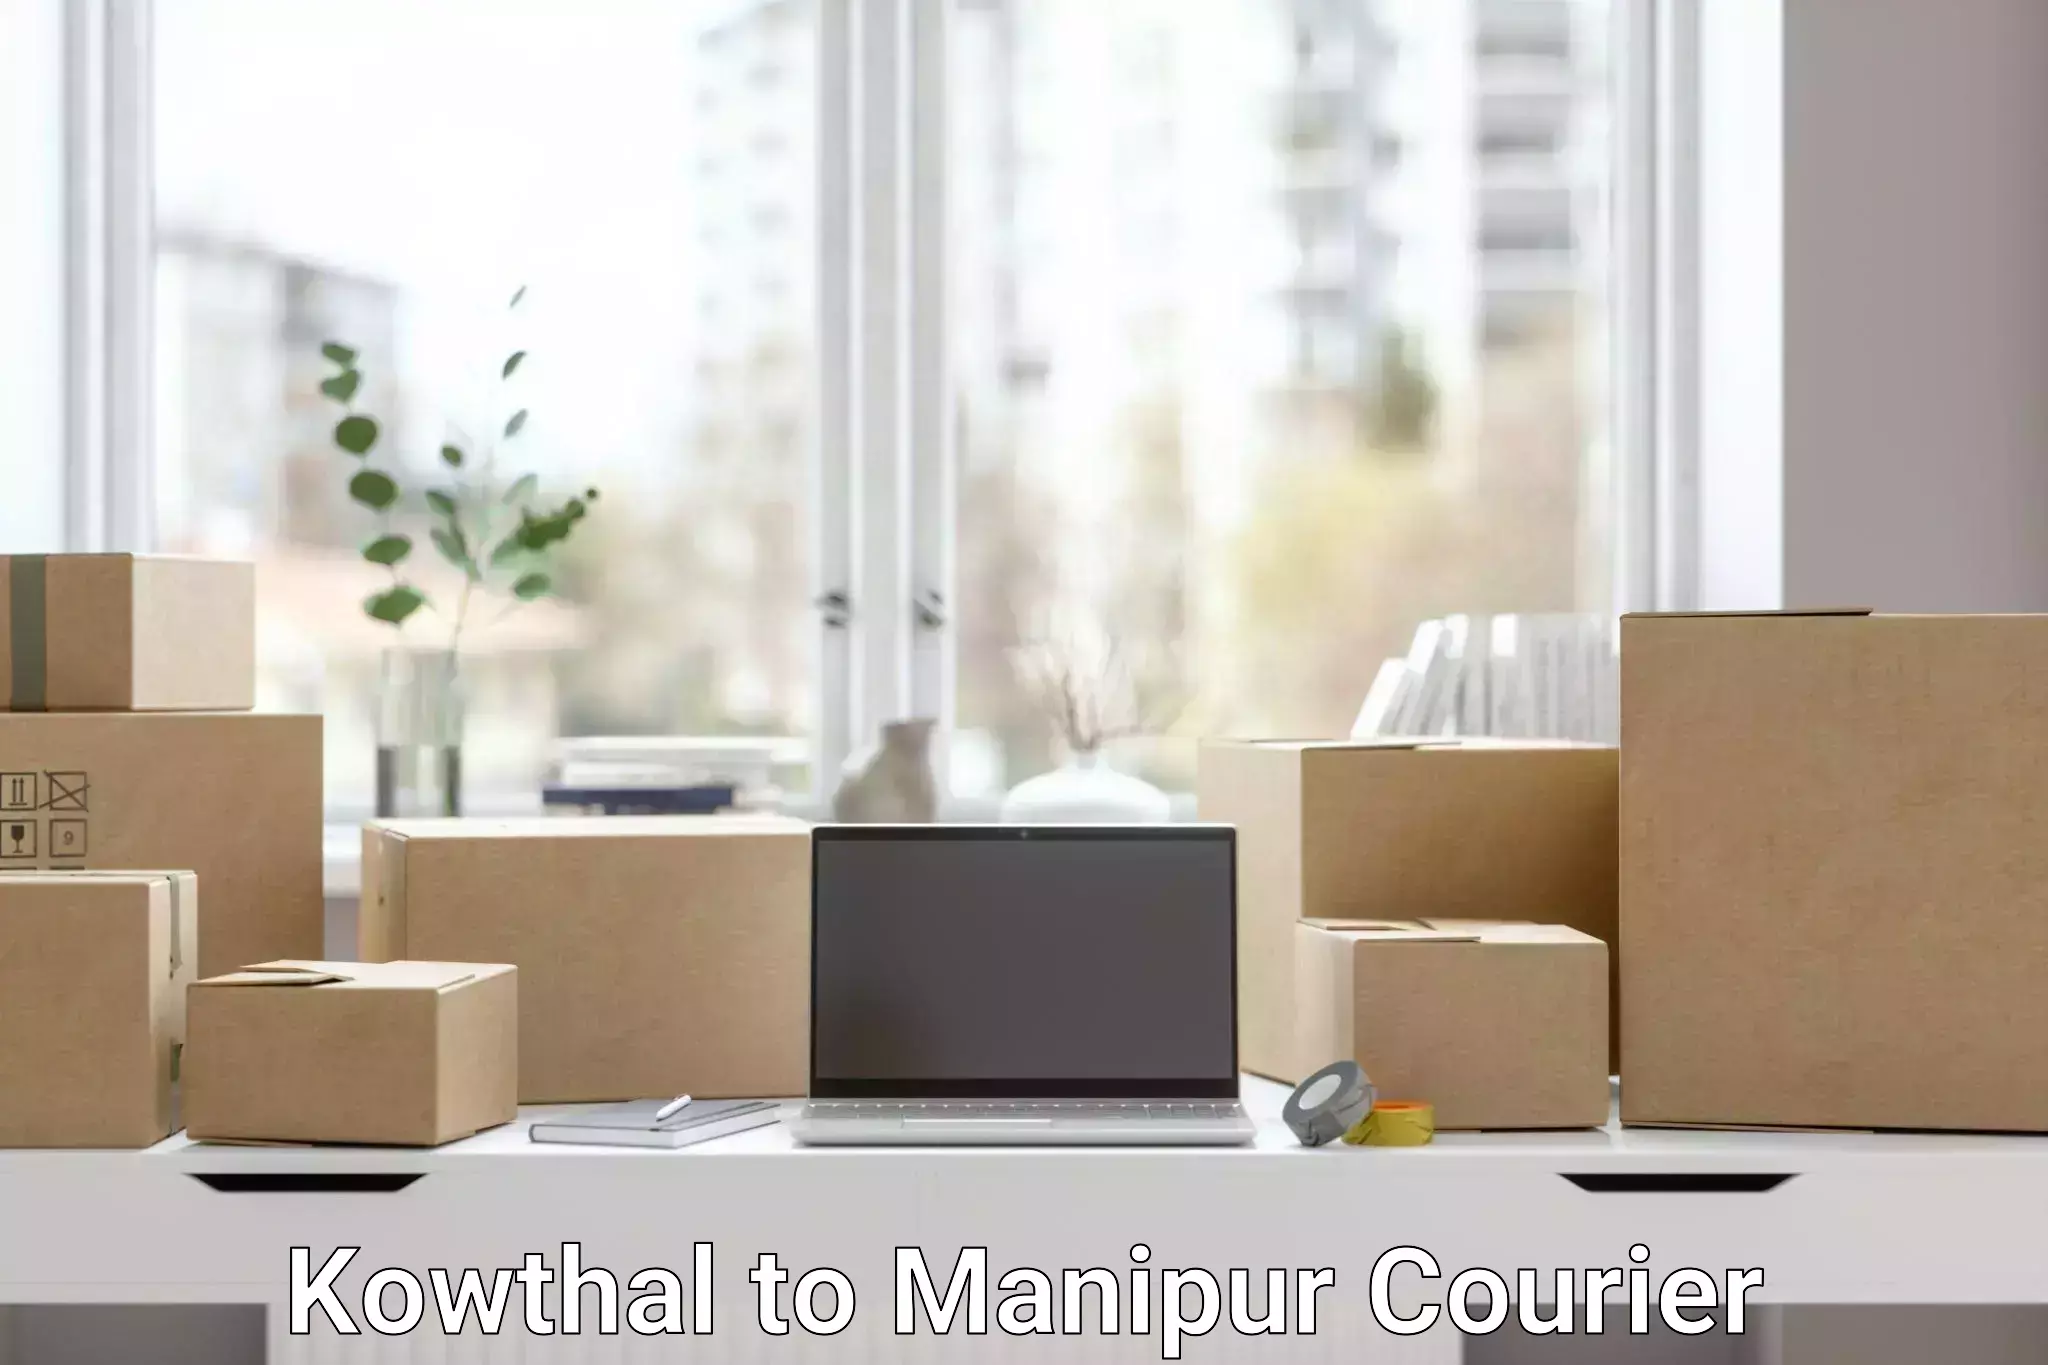 Global shipping solutions Kowthal to Manipur